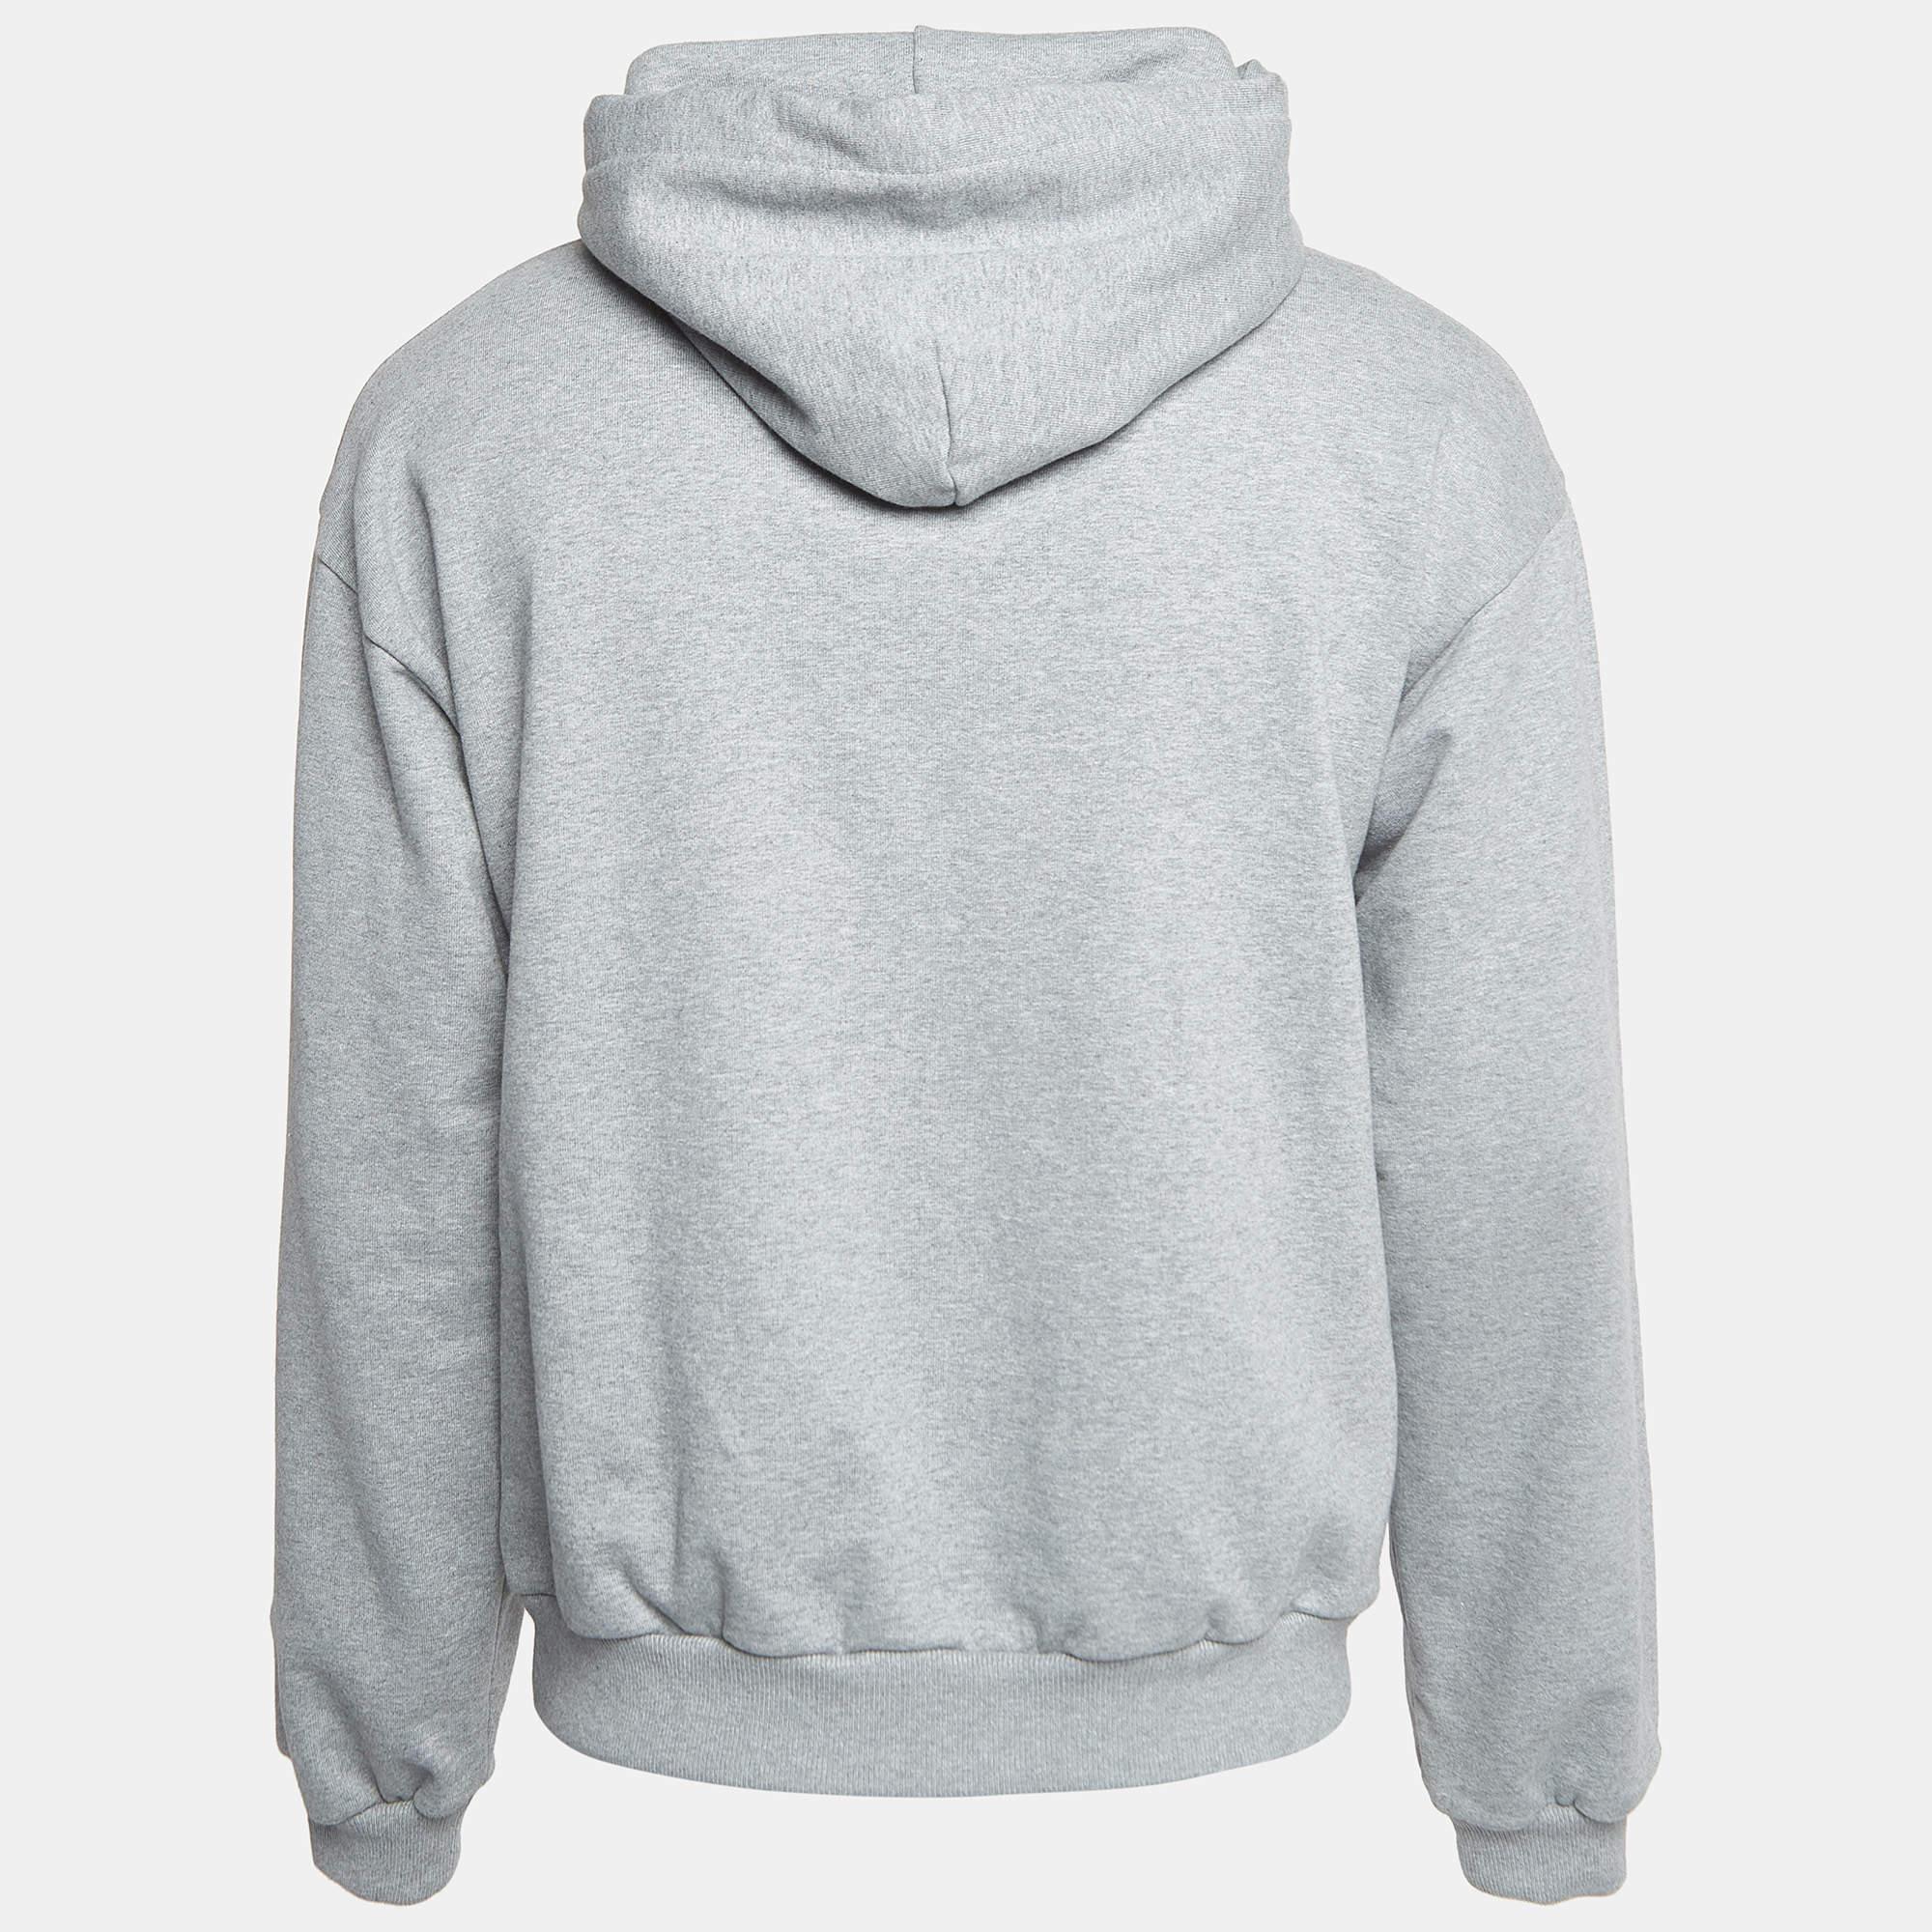 Discover the epitome of cozy chic with this Balenciaga men's sweatshirt. Crafted for both warmth and style, it combines comfort with fashion-forward detailing, making it your go-to choice for casual sophistication.

Includes: Brand Tag